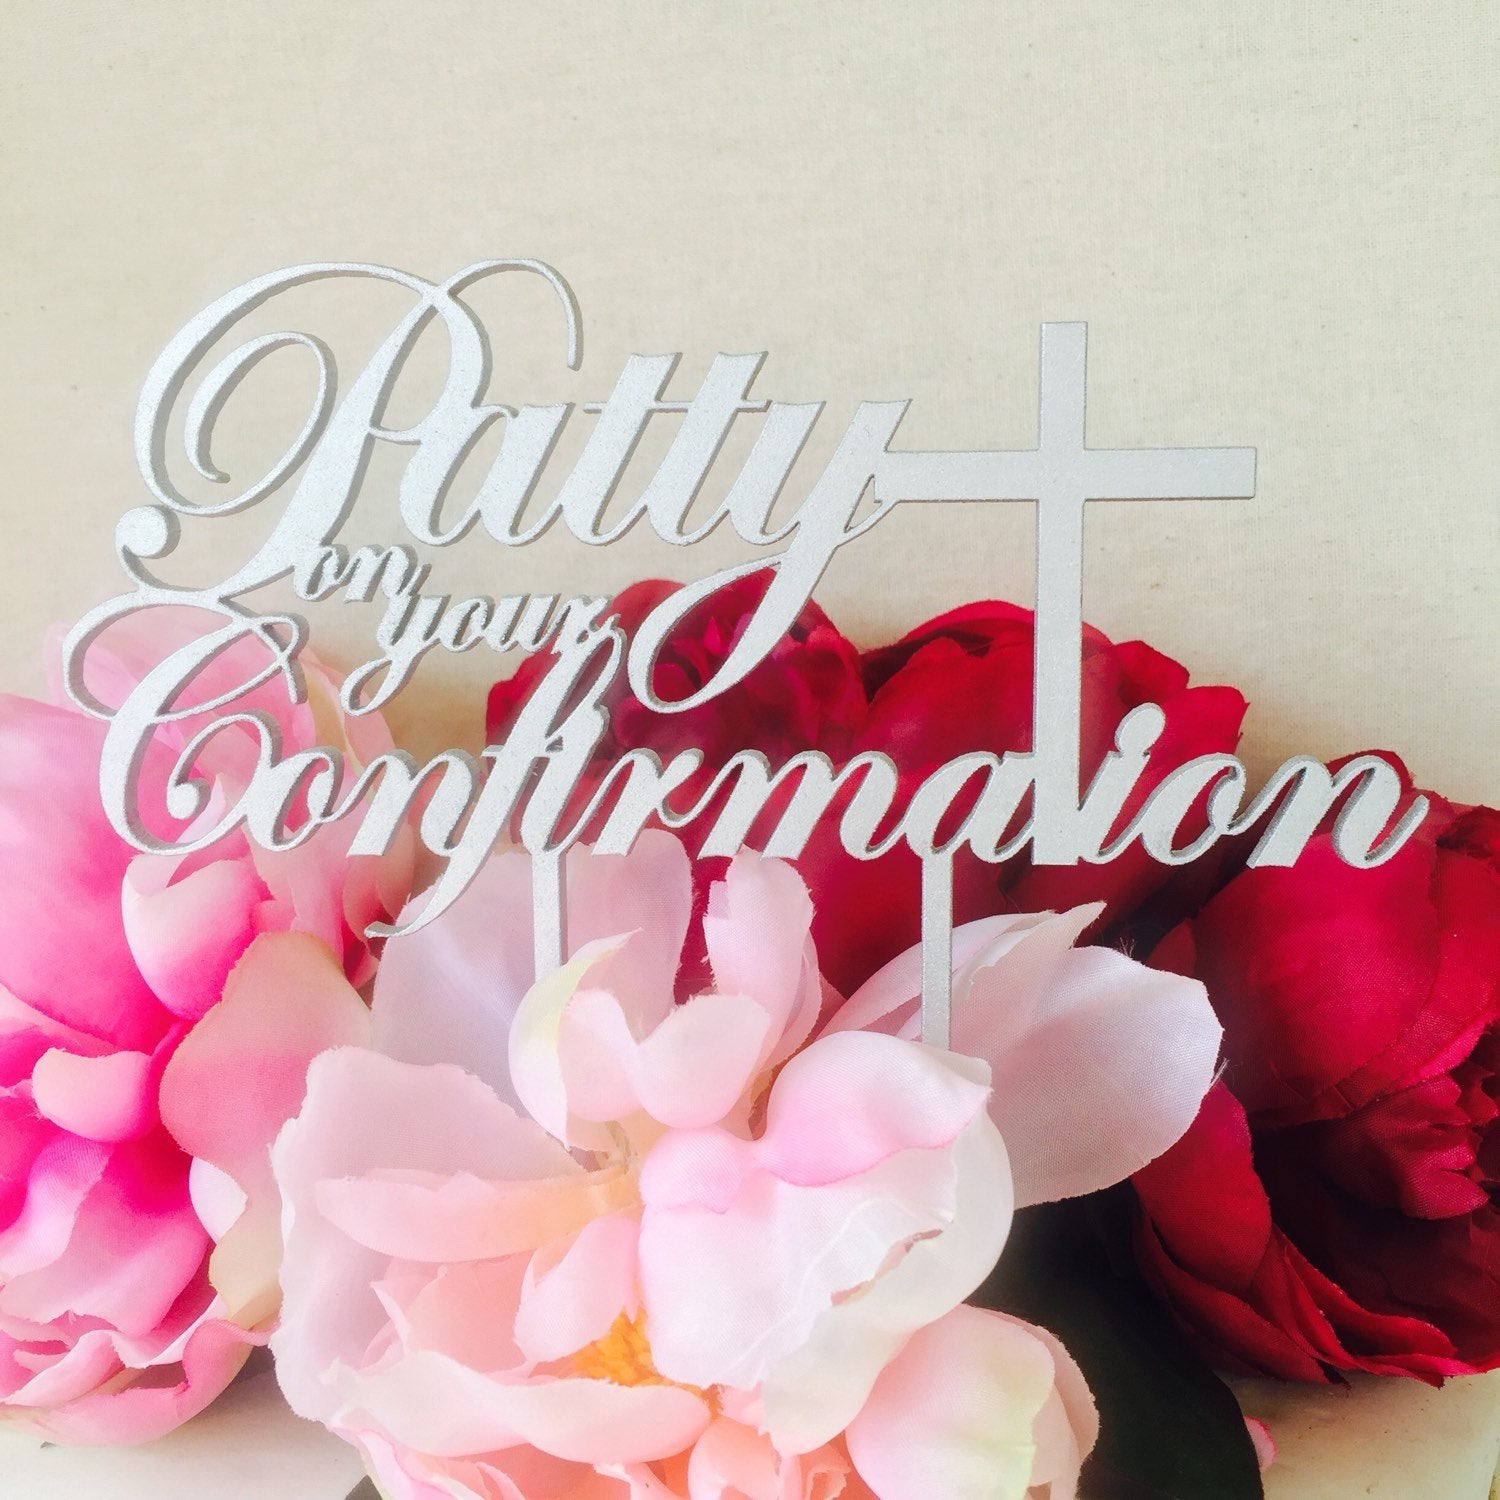 Confirmation Cake Decorations